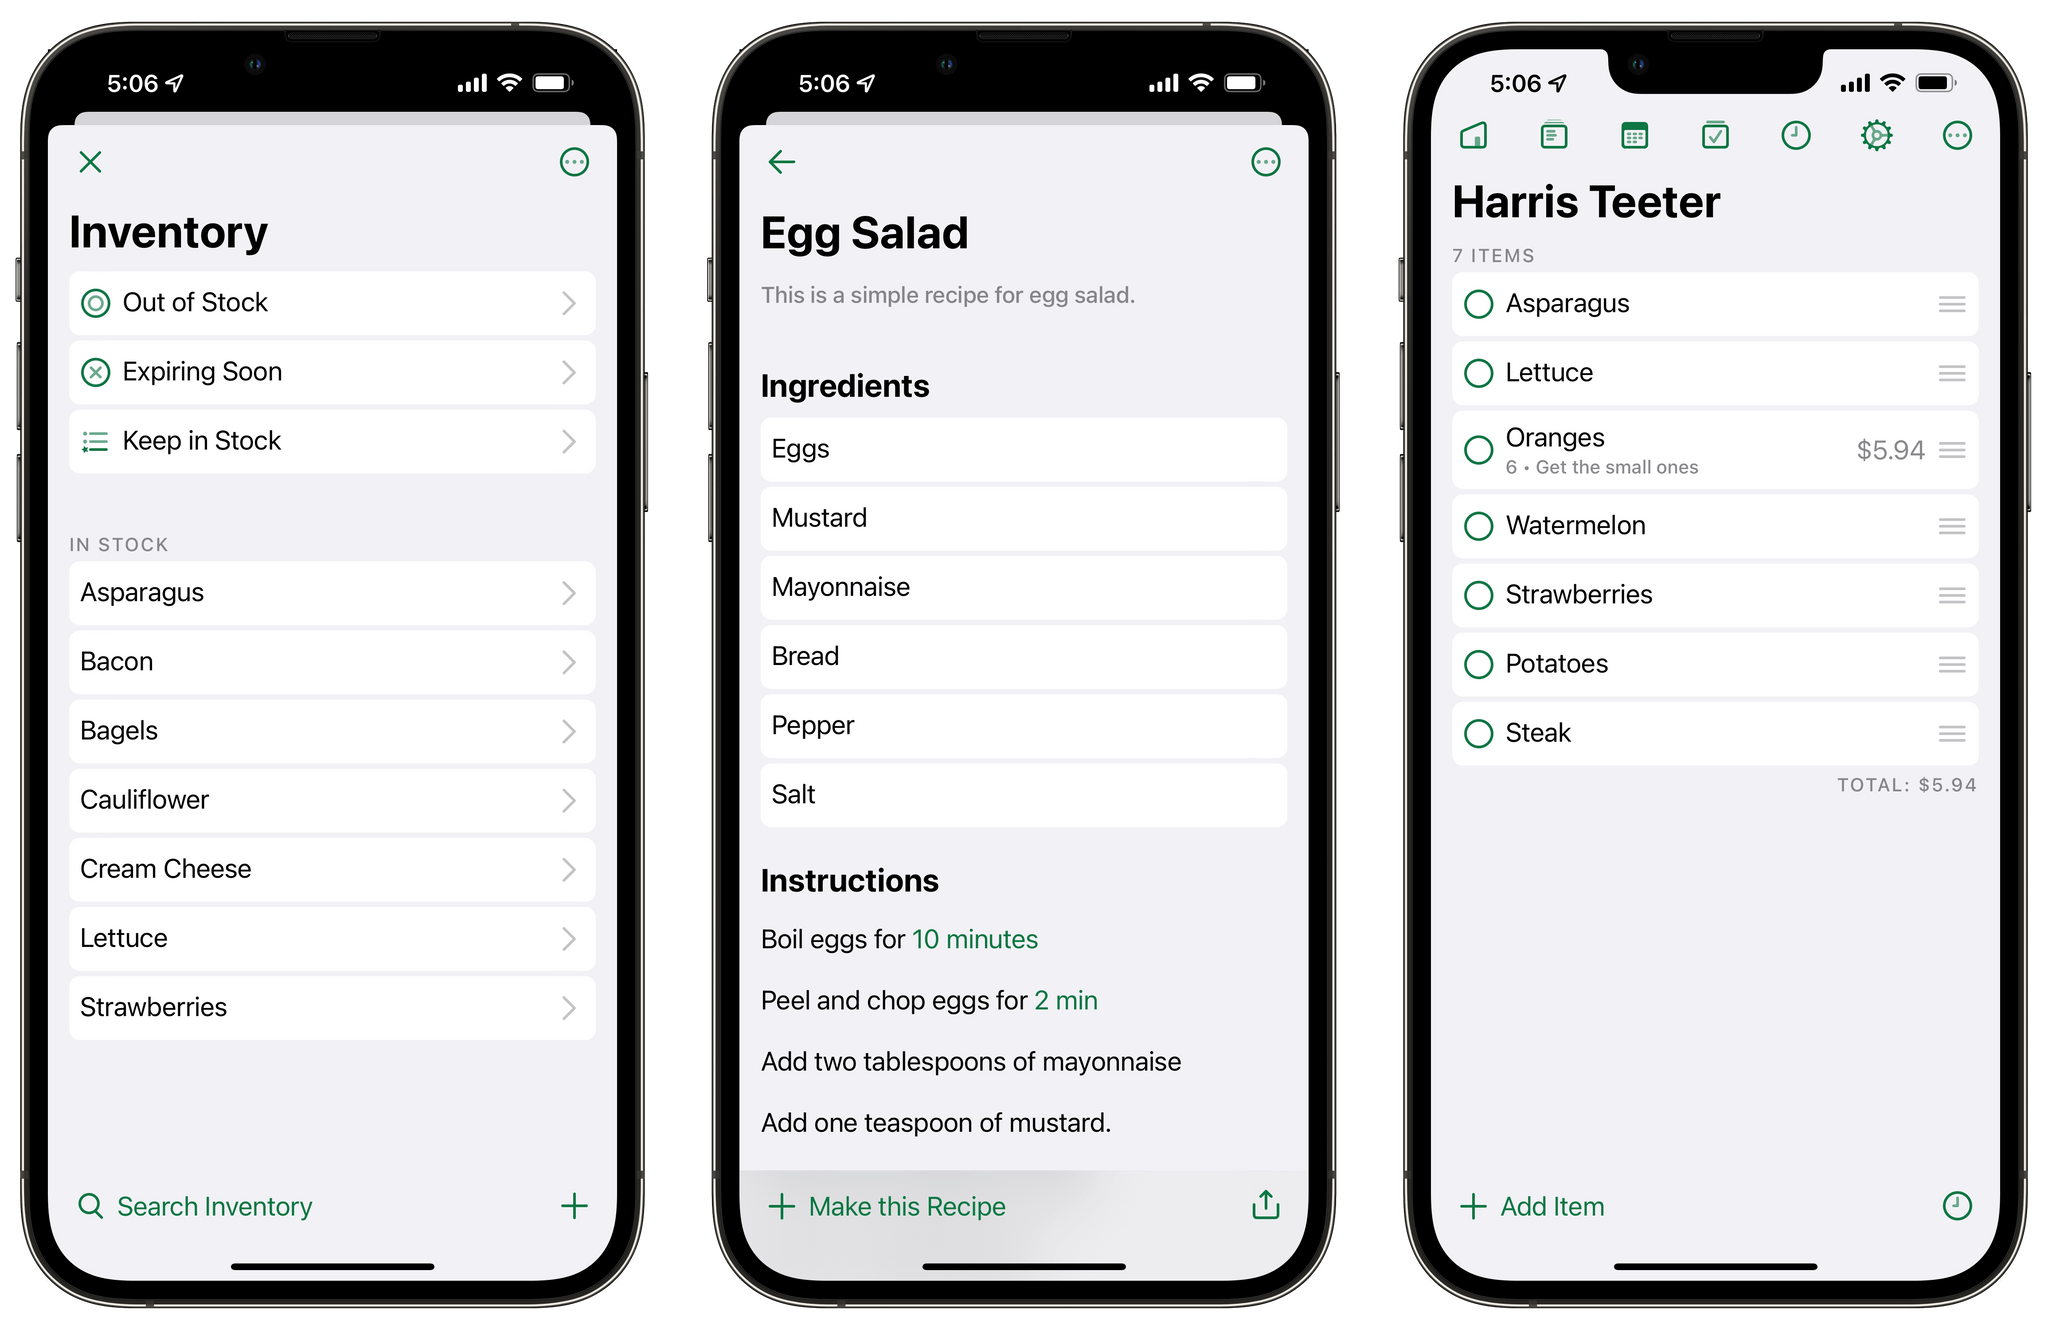 Grocery 3.0's design changes aren't a radical departure from prior versions, but the overall effect of many small changes is a fresh, new feel.